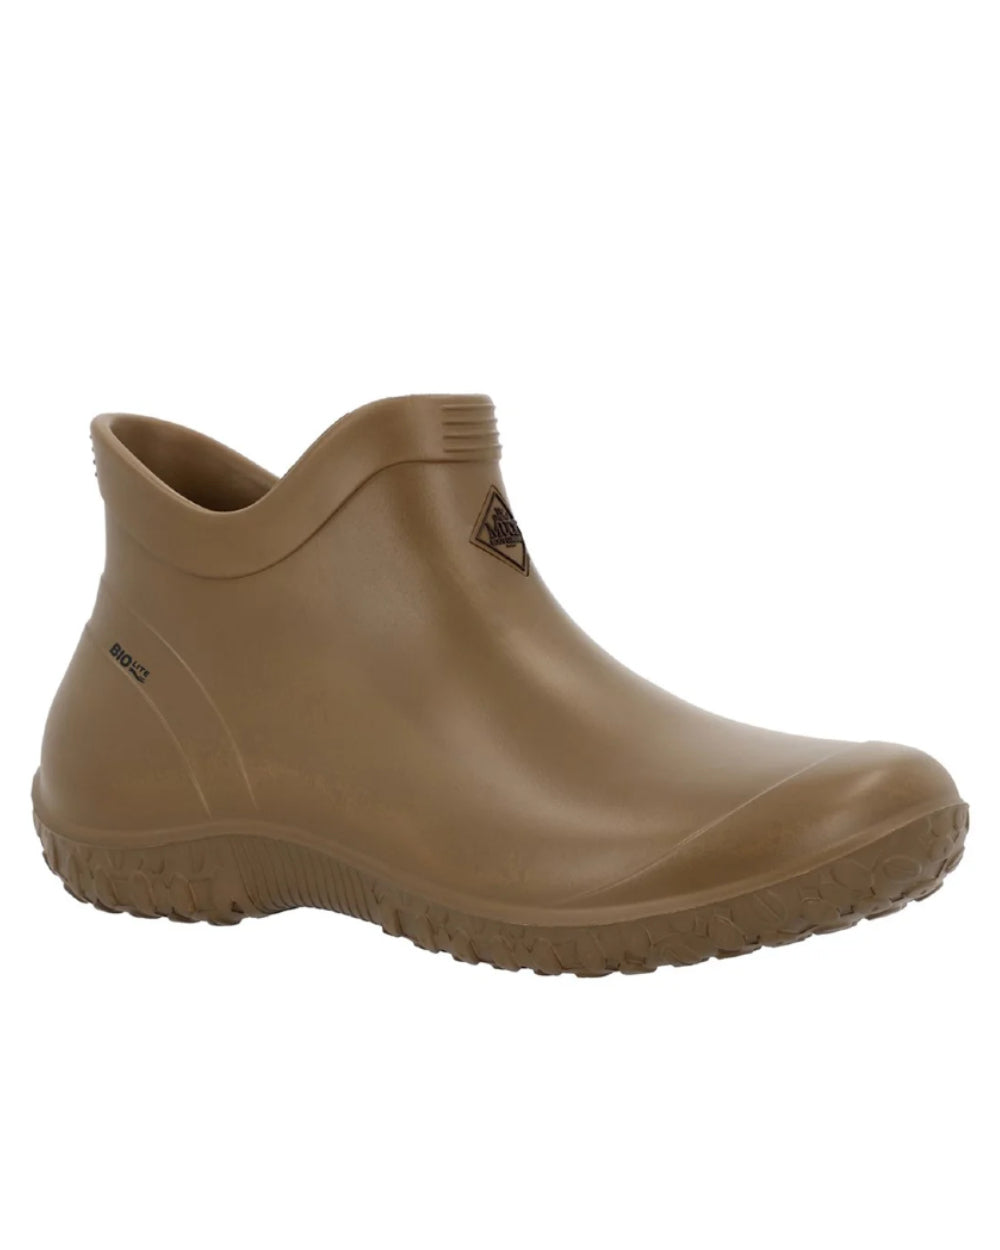 Kangaroo Coloured Muck Boots Mens Muckster Lite Ankle Boots On A White Background 